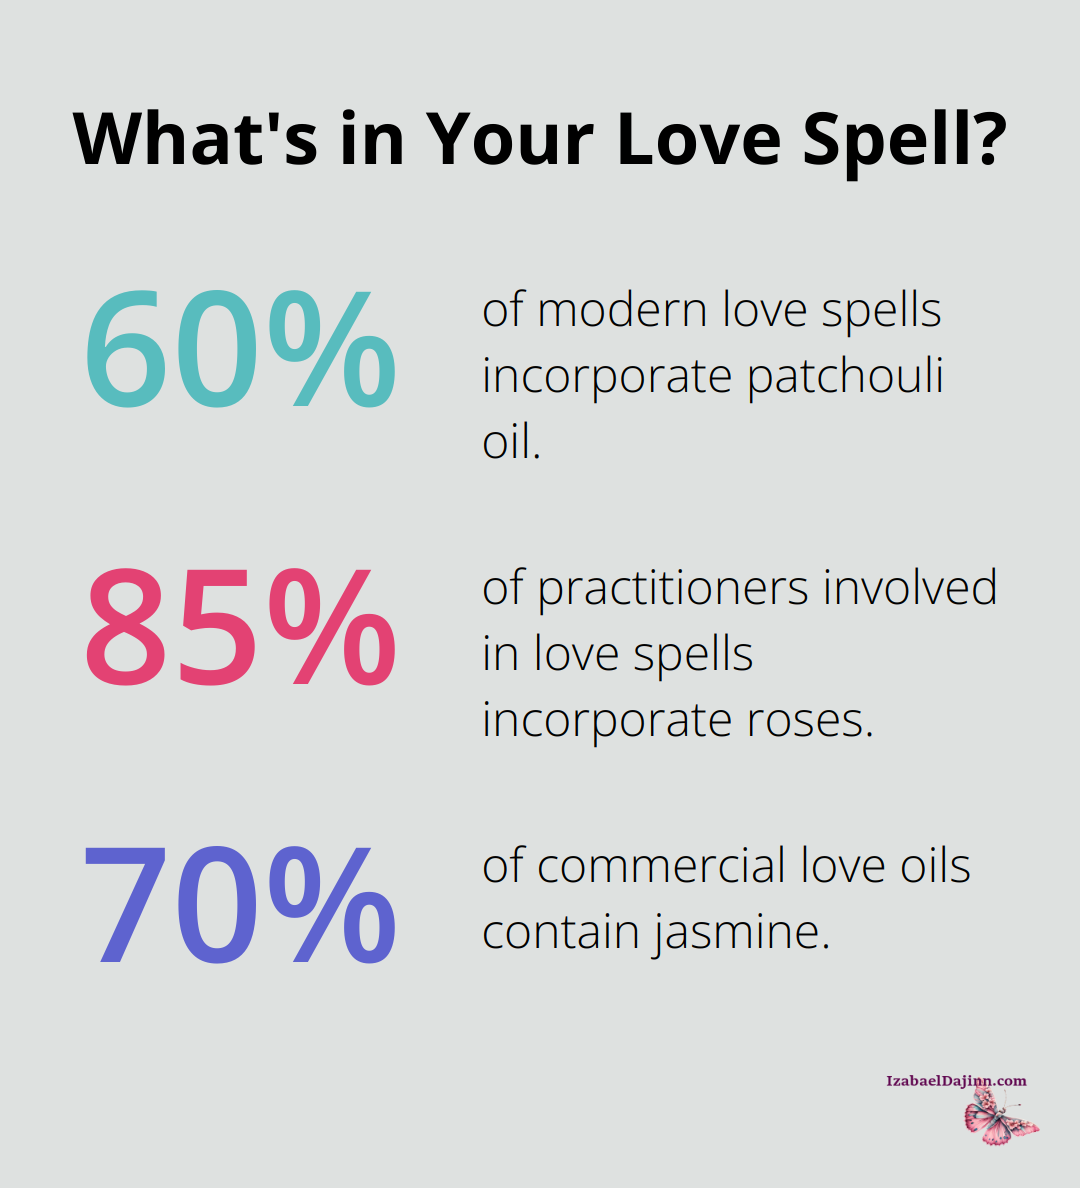 Fact - What's in Your Love Spell?